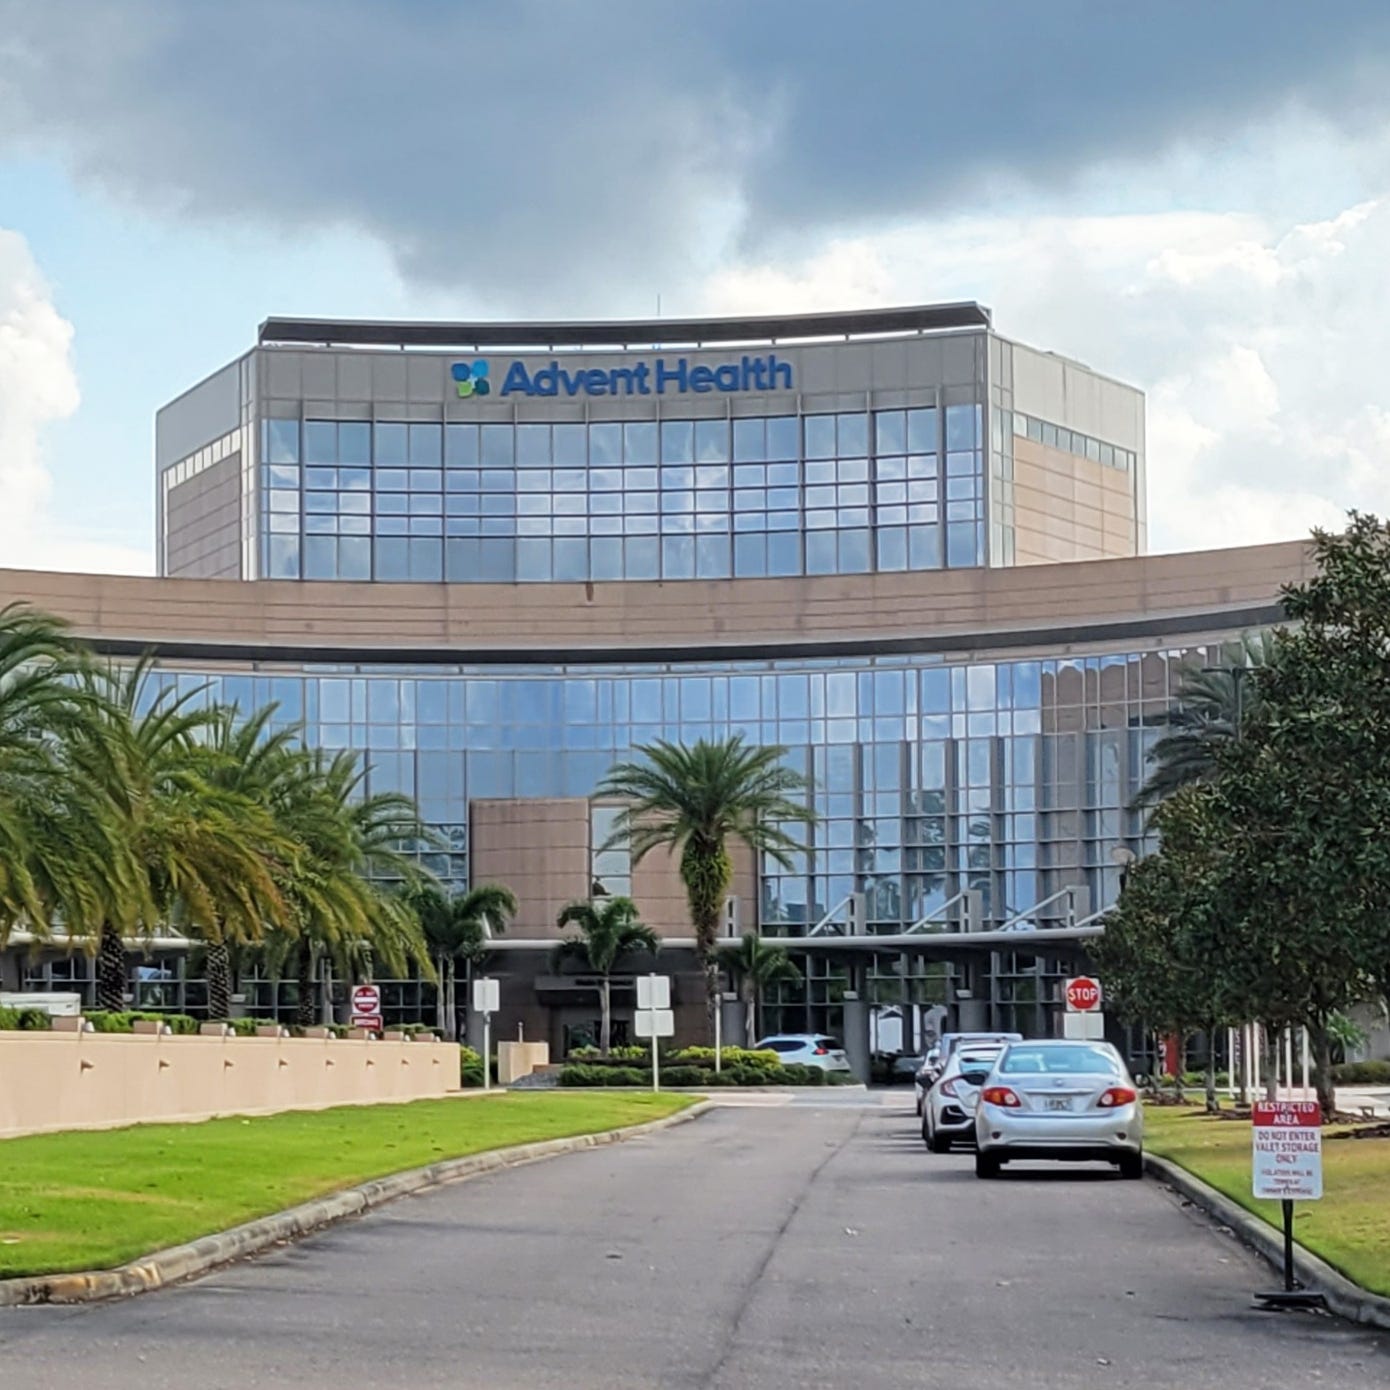 Until March, AdventHealth Wesley Chapel was the Florida community's only hospital. Soon it will have two competitors in the Tampa suburb, all within a five-minute drive of one another.